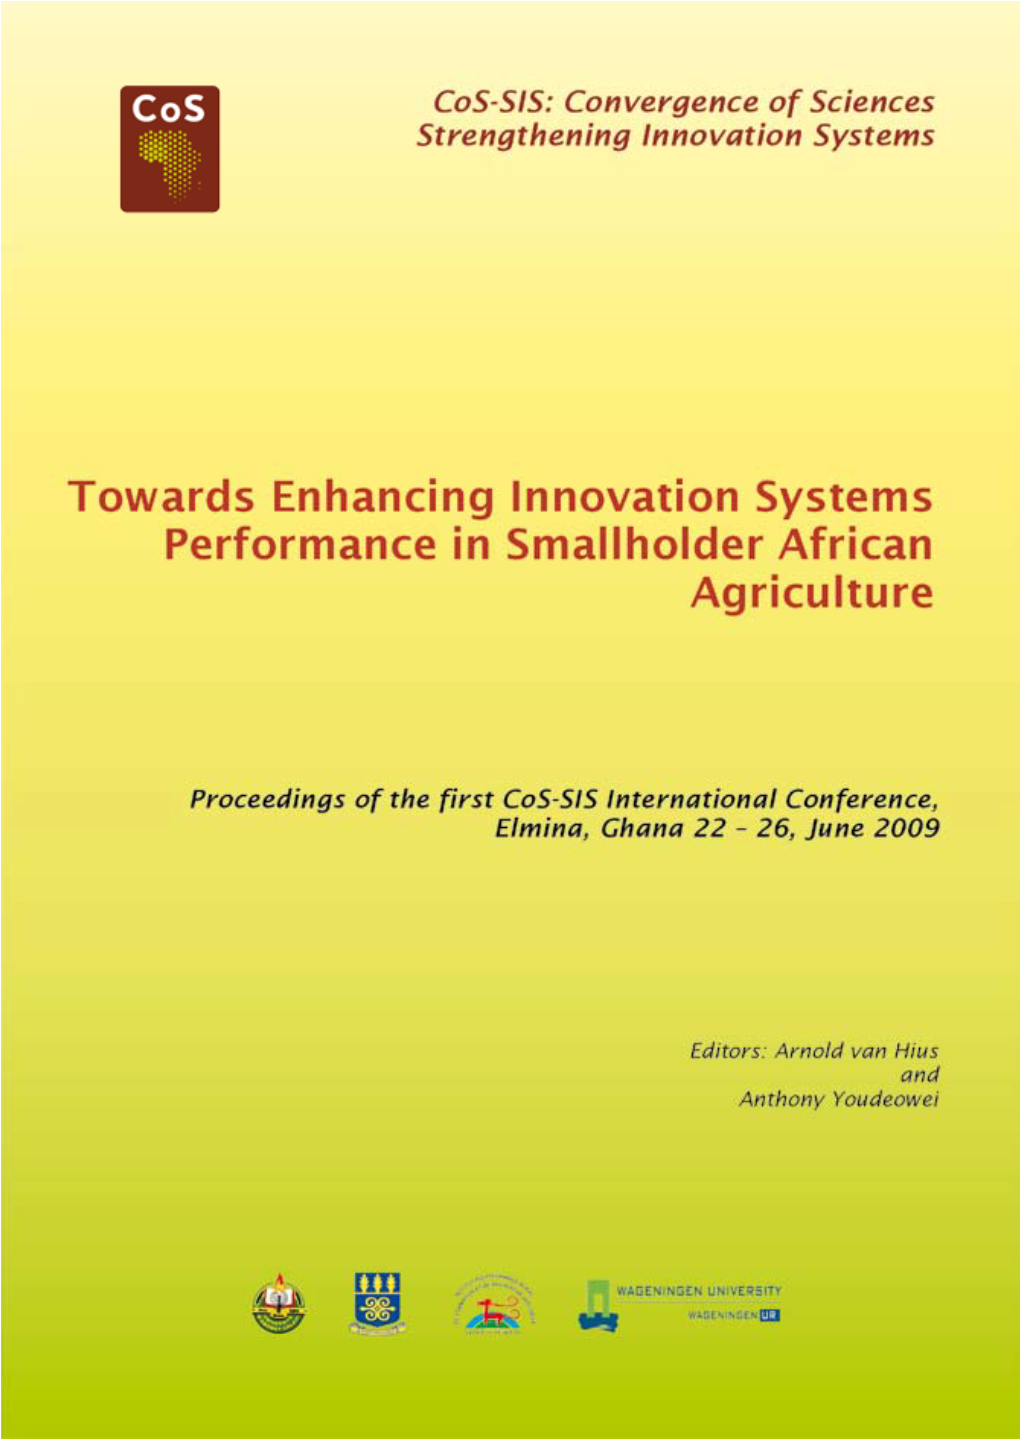 Towards Enhancing Innovation Systems Performance in Smallholder African Agriculture